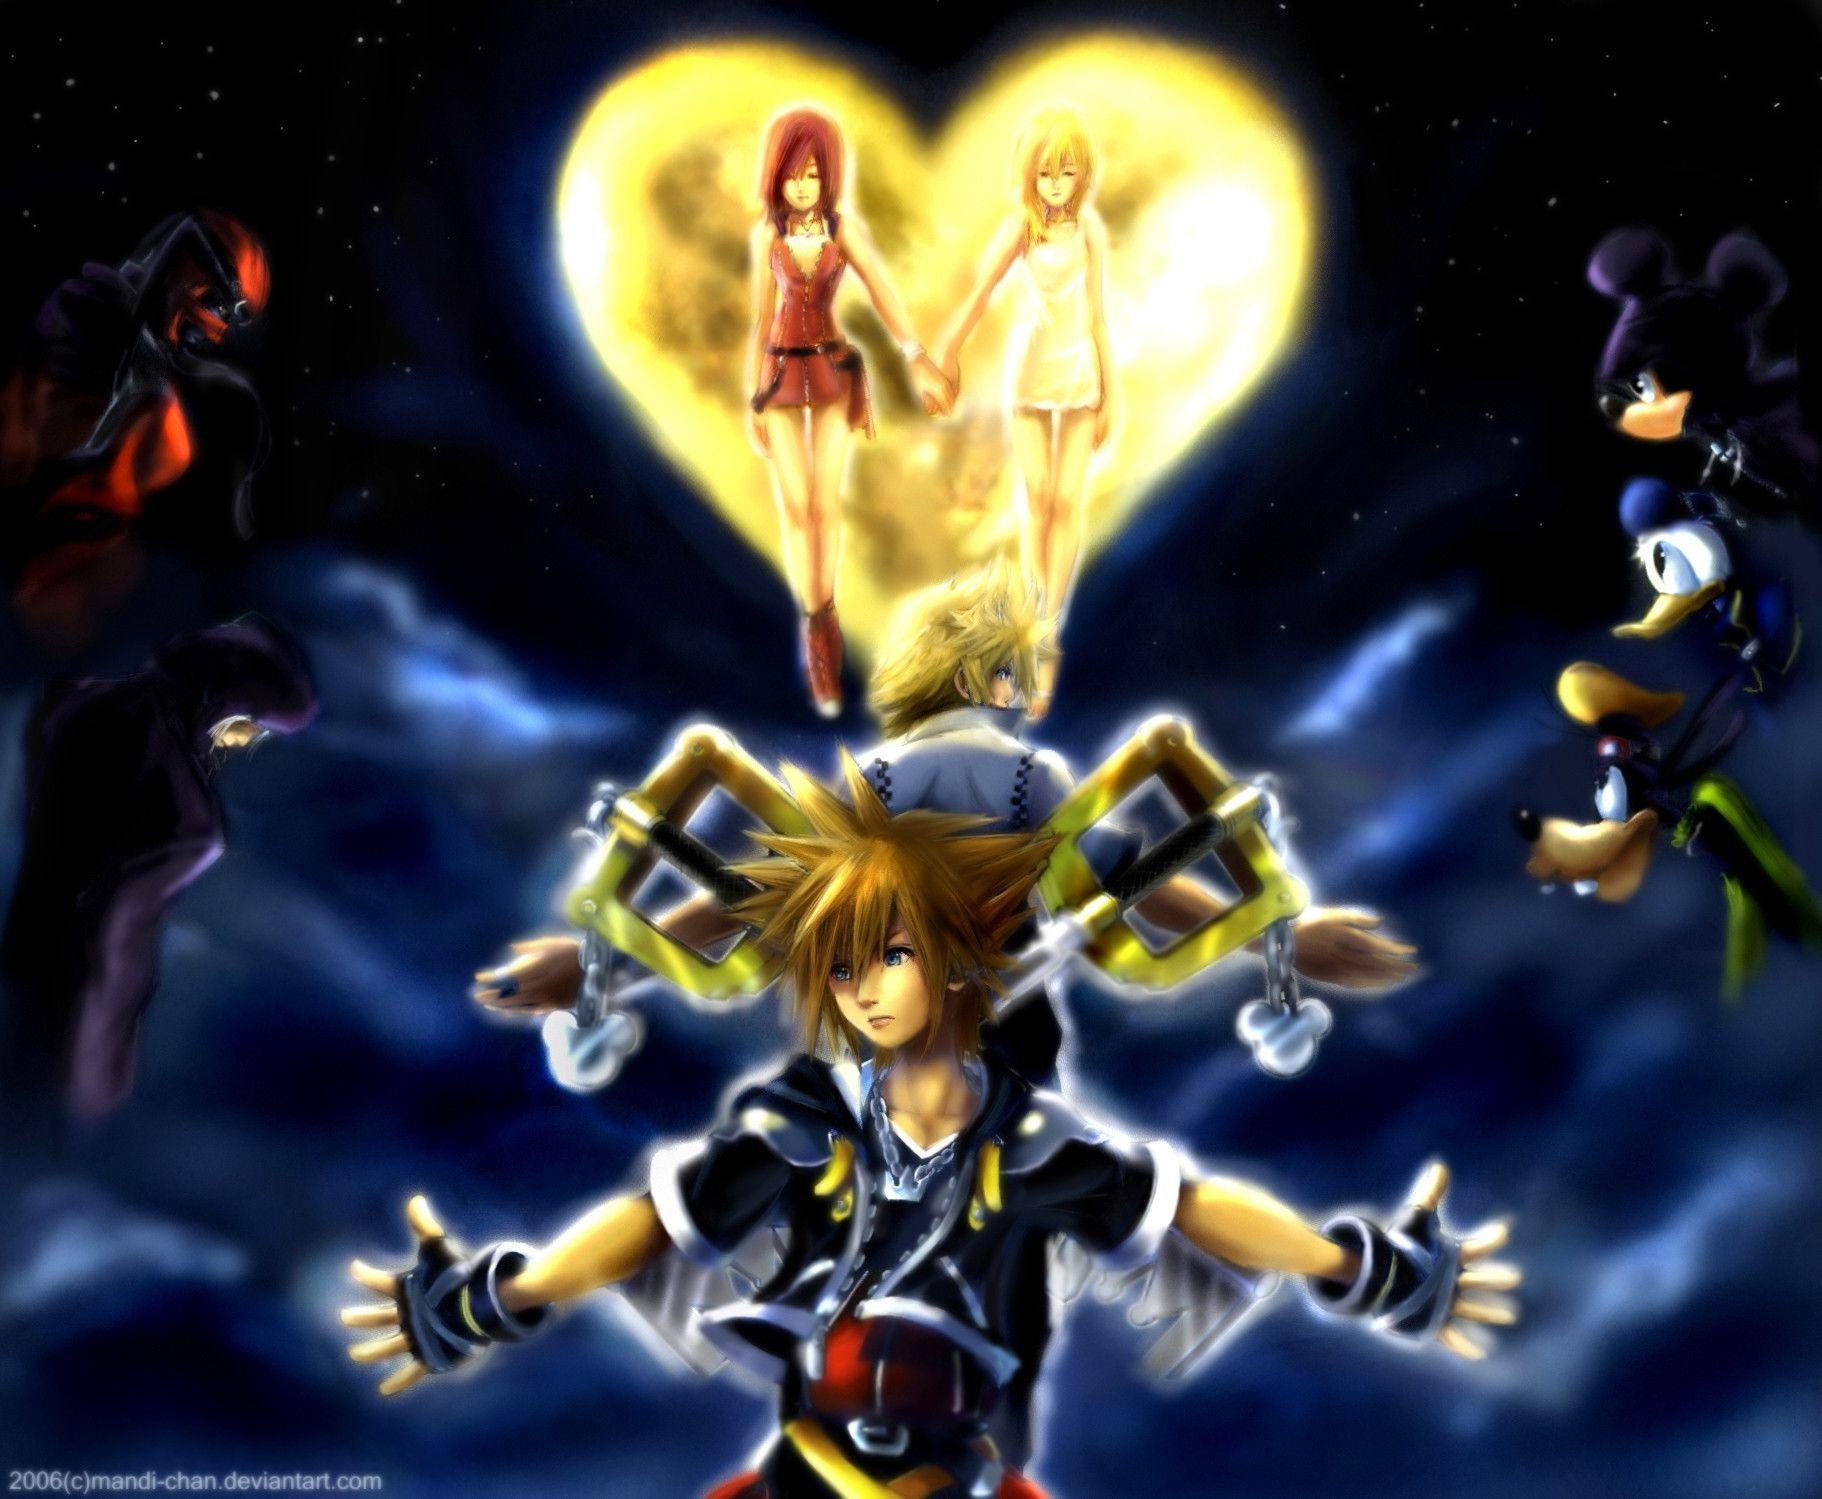 Wallpapers For > Kingdom Hearts 2 Roxas Wallpapers